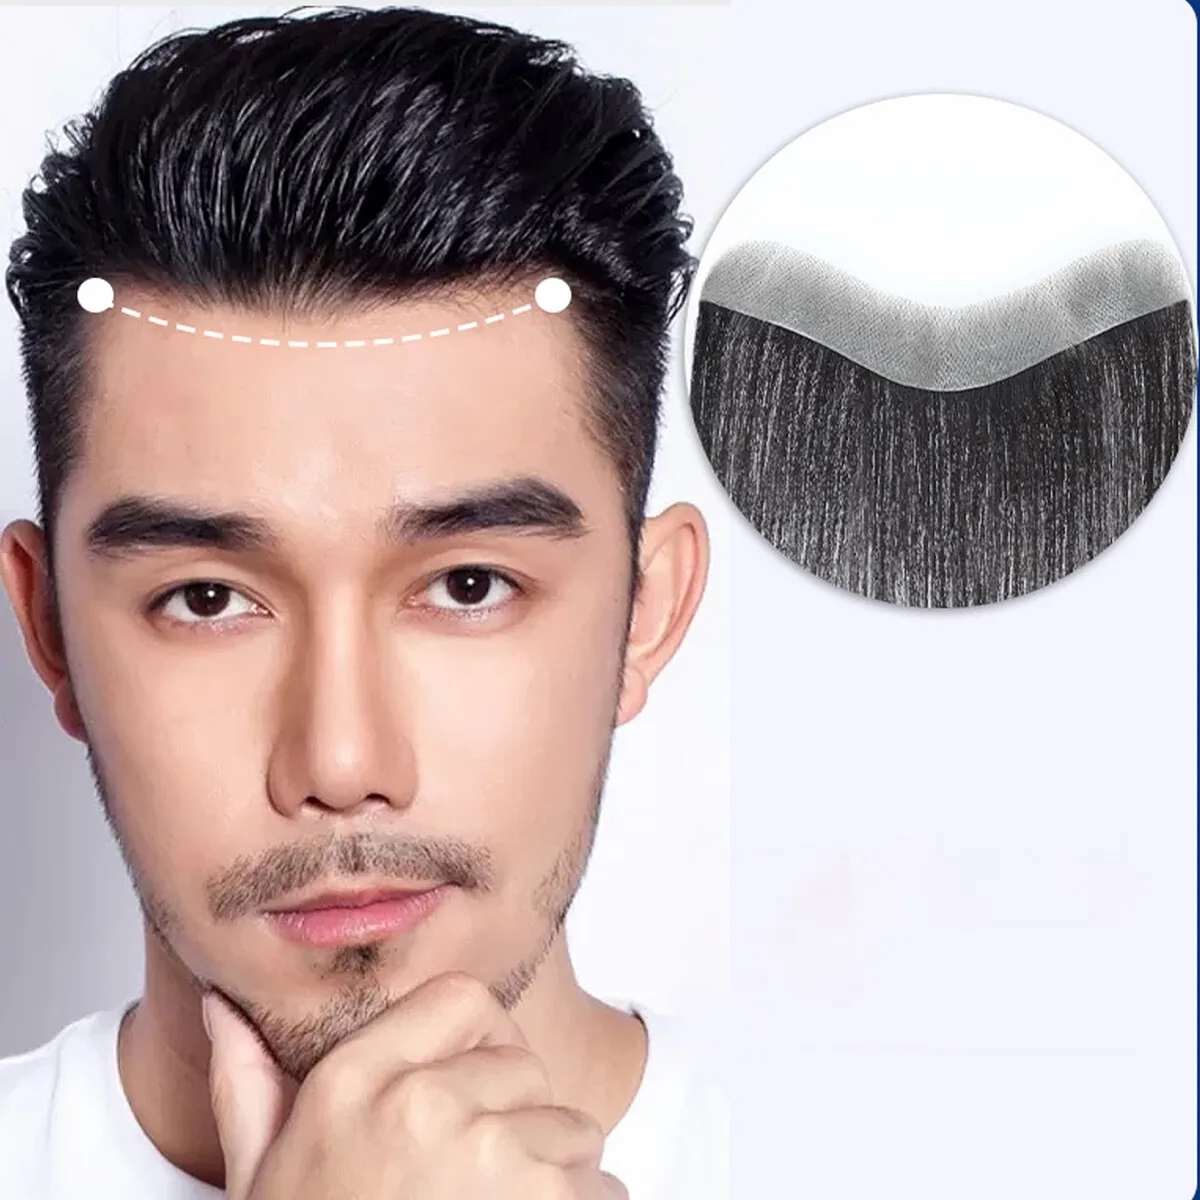 Thin Hairpiece Replacement System 100% Human Hair Toupee for Men Forehead Topper Thin Hairpiece Replacement System 100% Human Hair Toupee for Men Forehead Topper Thin Hairpiece,Men Forehead Topper,Men's Hairline Toupee